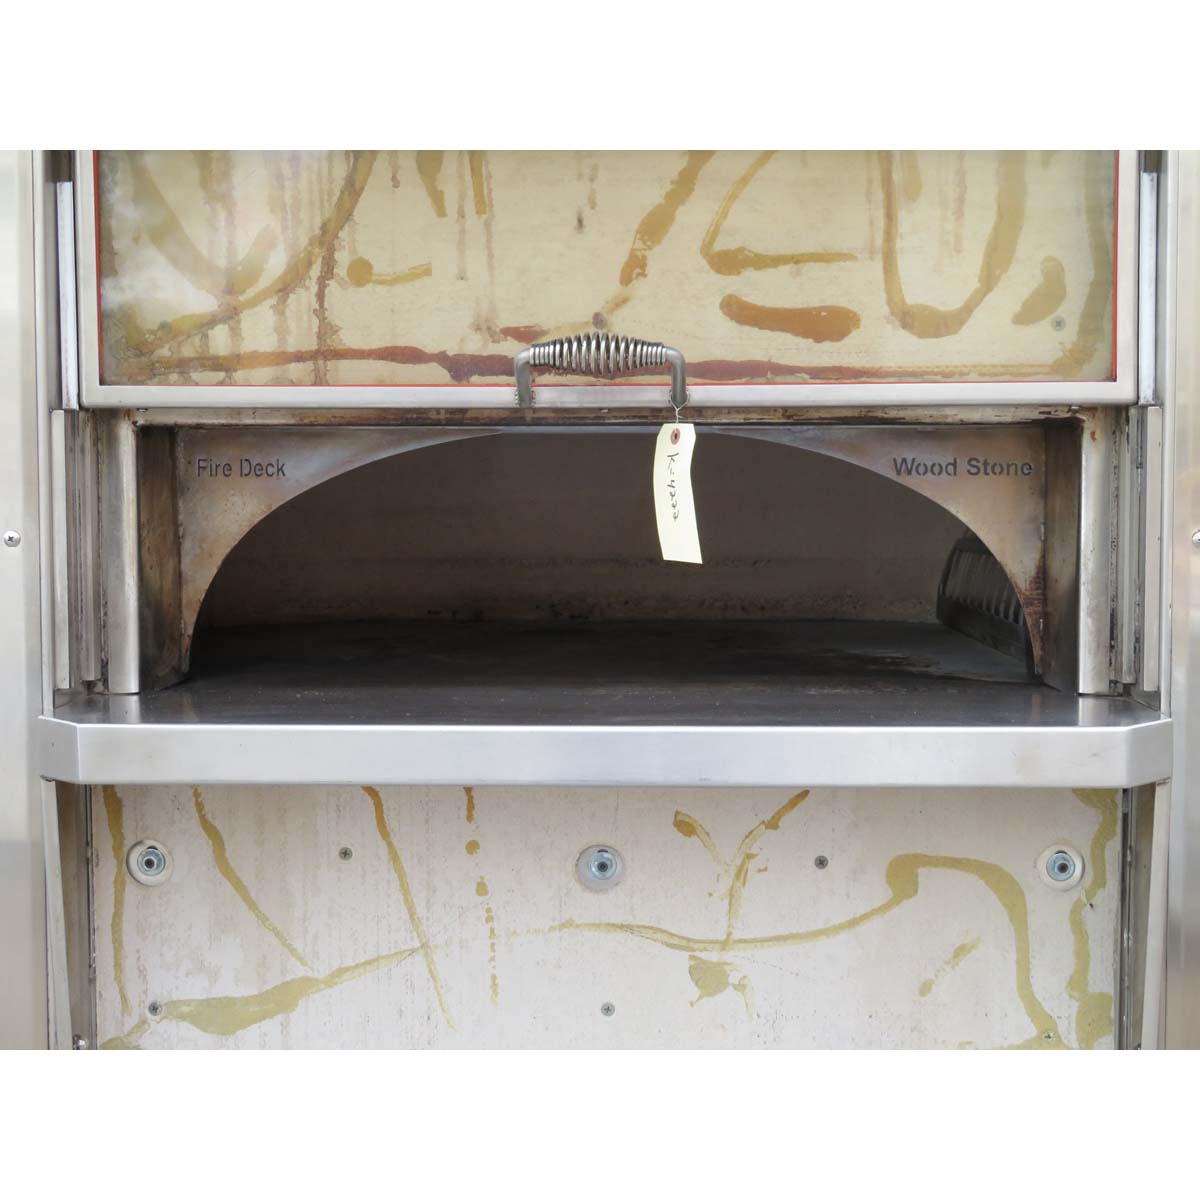 Woodstone WS-FD-6045-RFG-R-IR-NG Gas Hearth Pizza Oven, Used Good Condition image 5